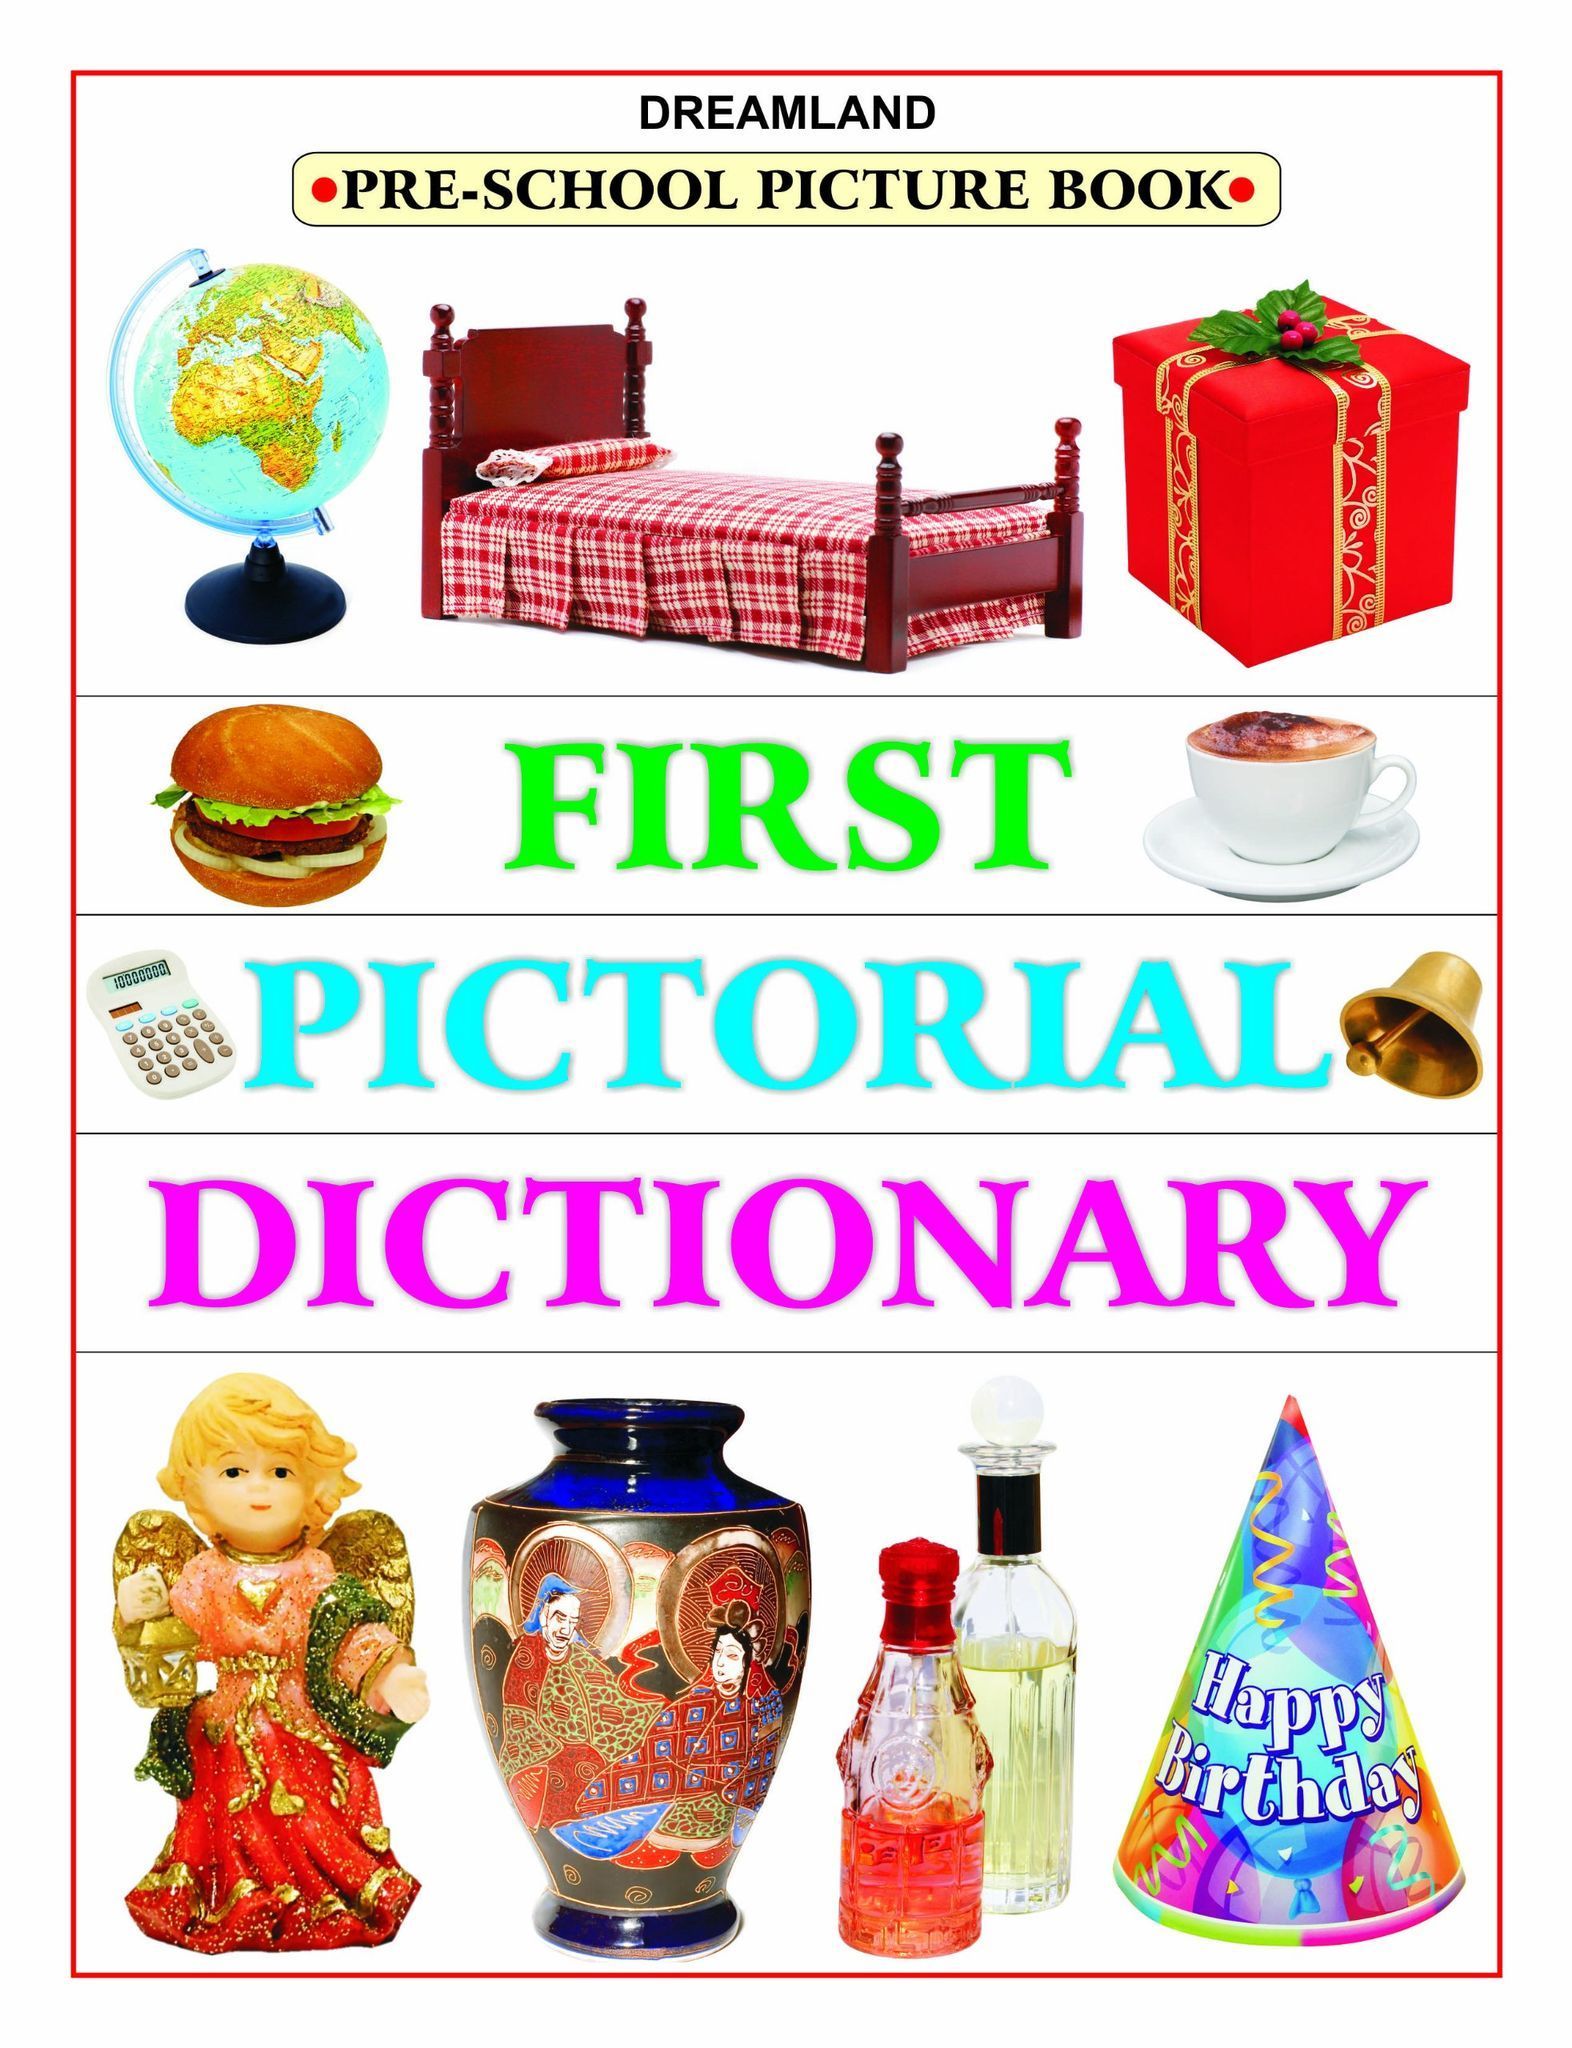 First Pictorial Dictionary for Children Age 2-4 Years - Pre-School Picture Books for Kids [Paperback] Dreamland Publications